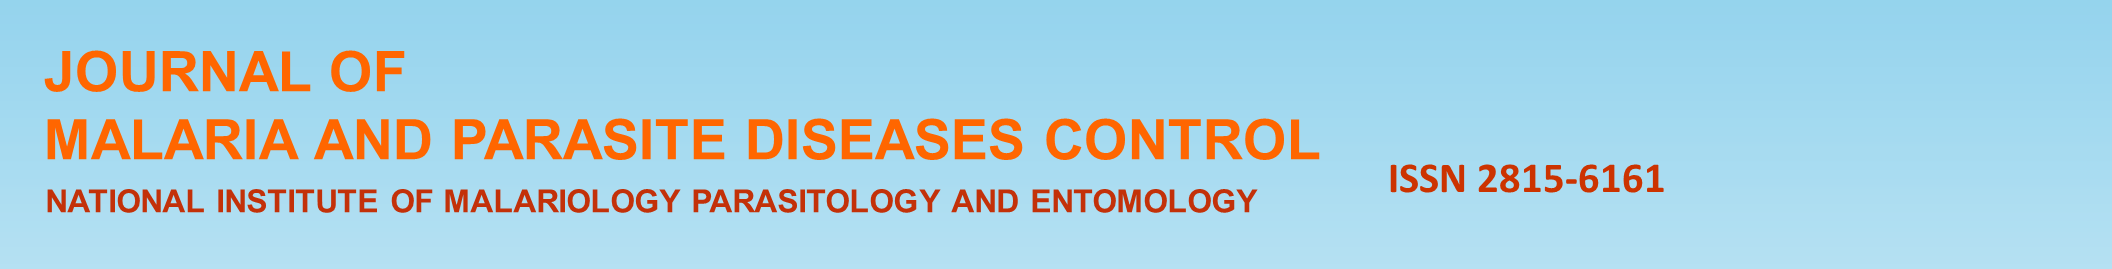 JOURNAL OF MALARIA AND PARASITE DISEASES CONTROL